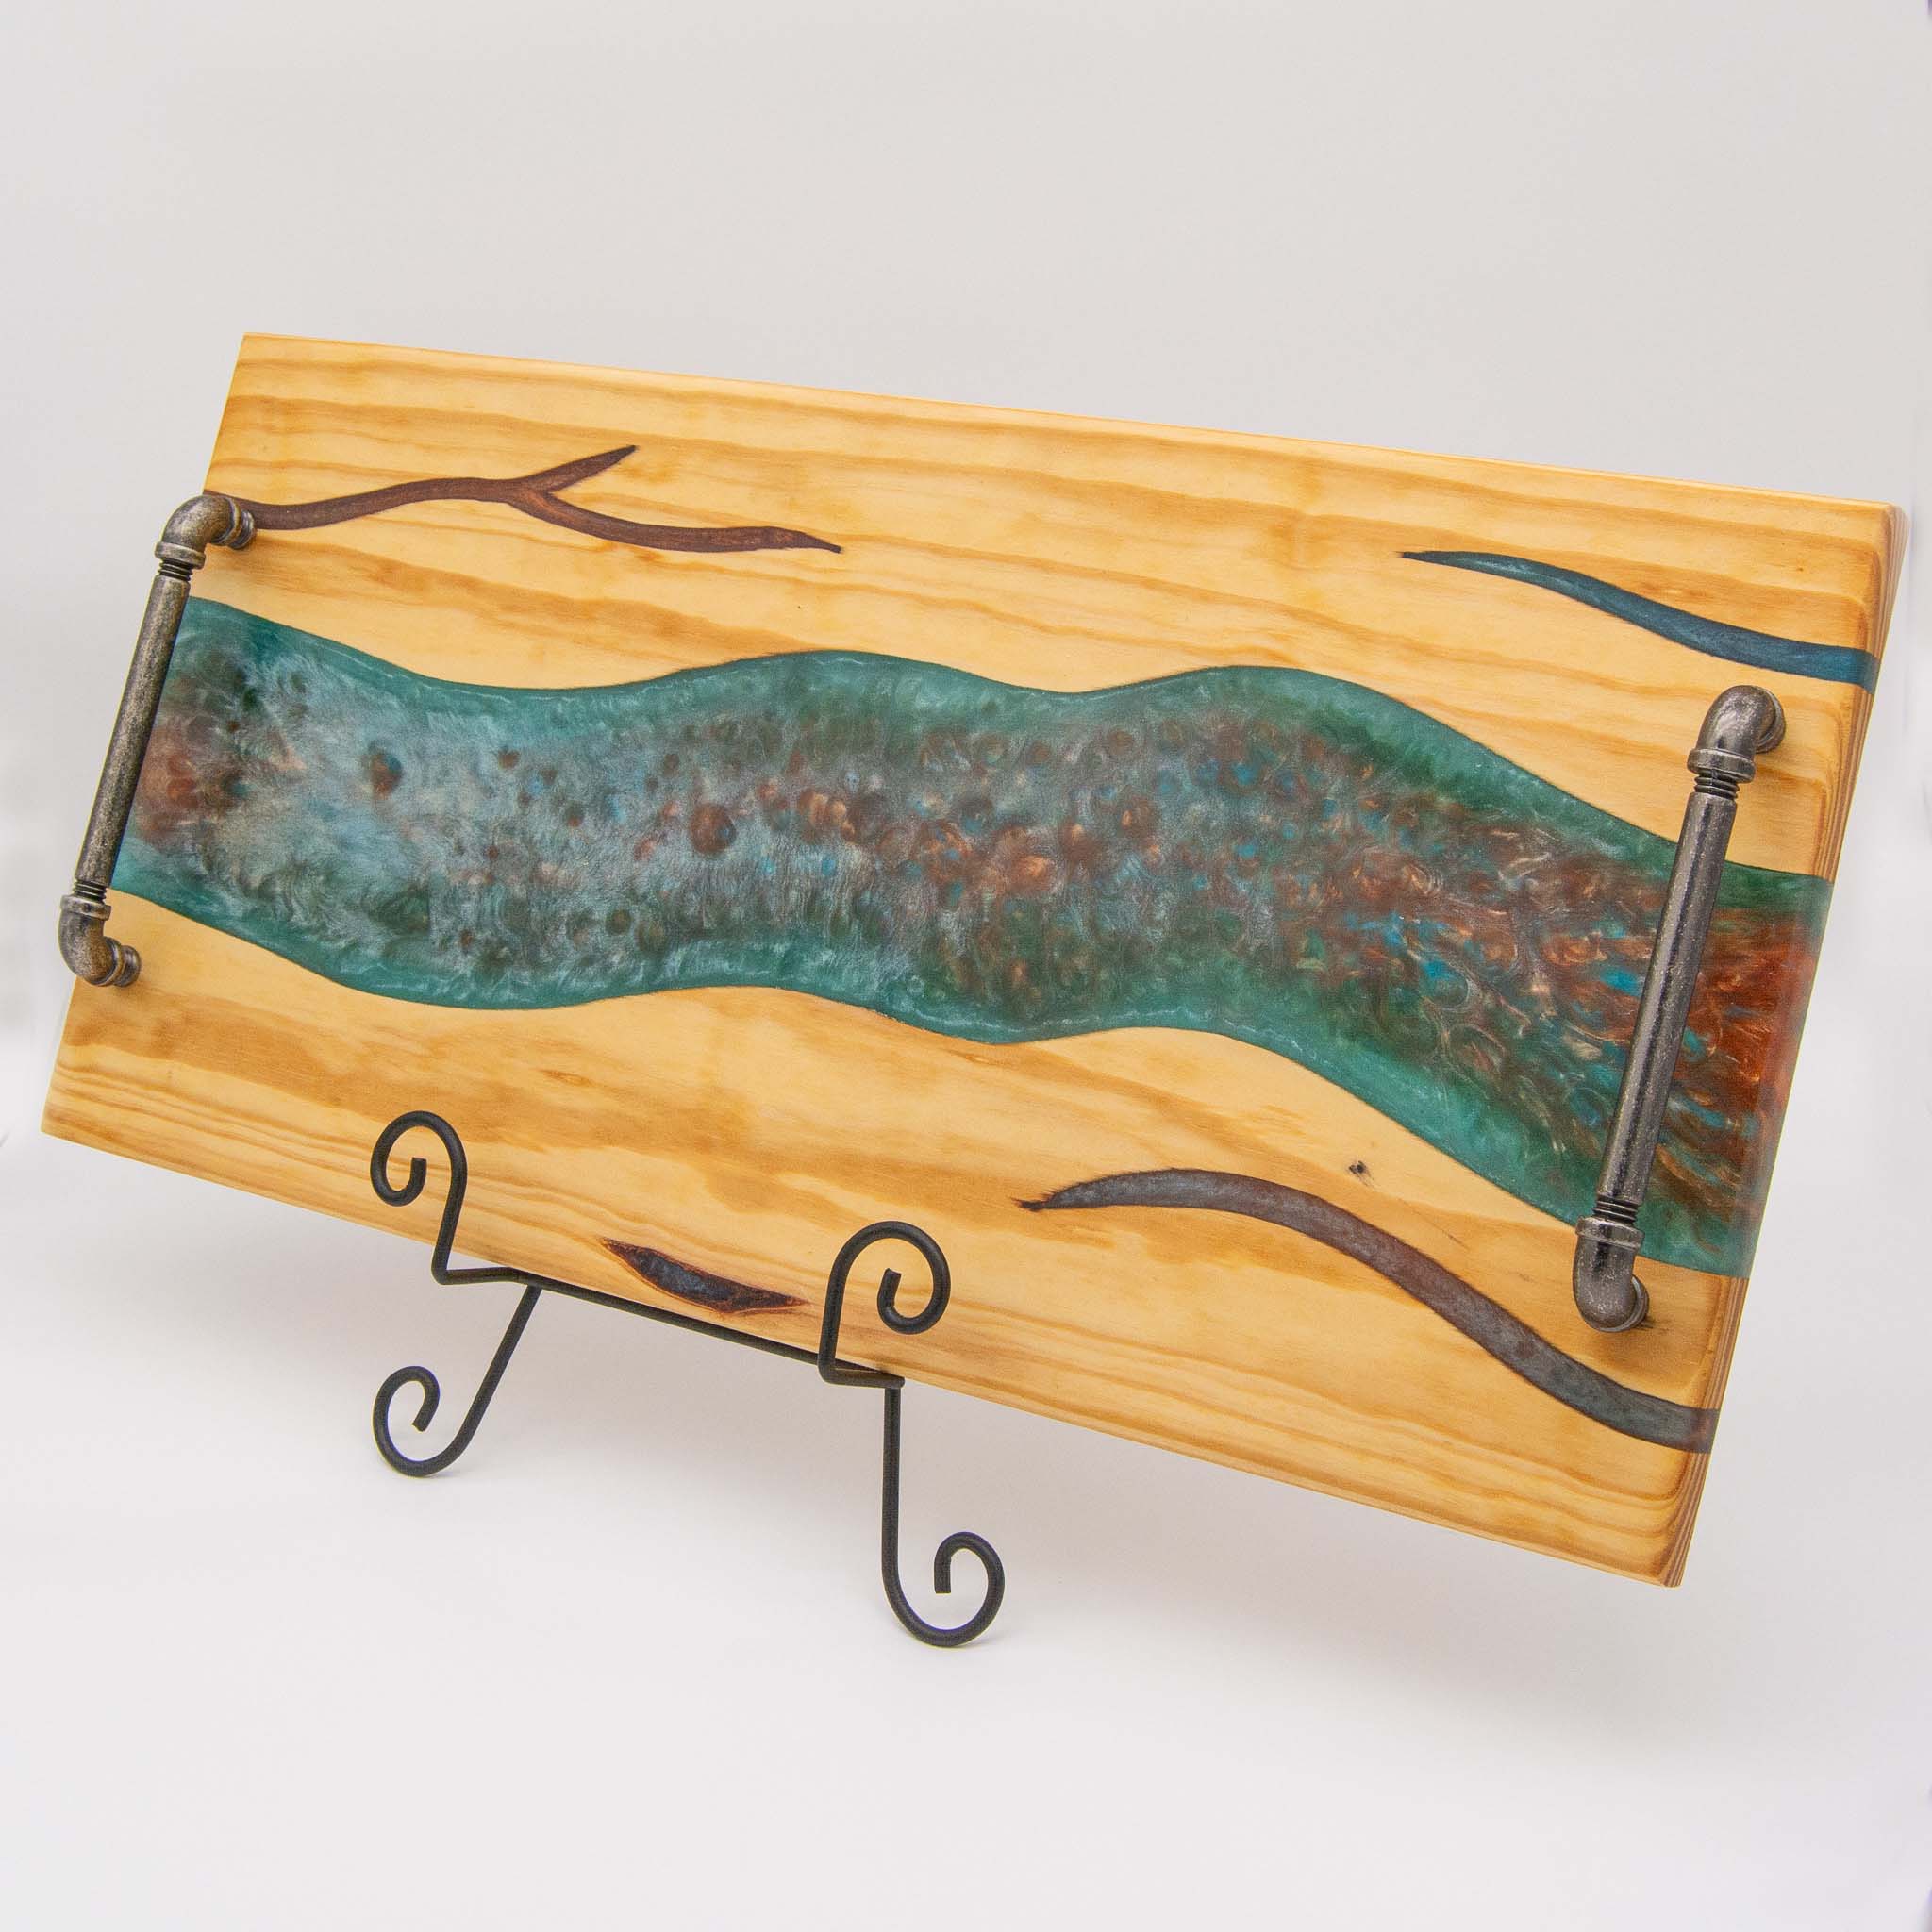 Turquoise, Green, Blue, Silver and Copper River Pine Charcuterie Board